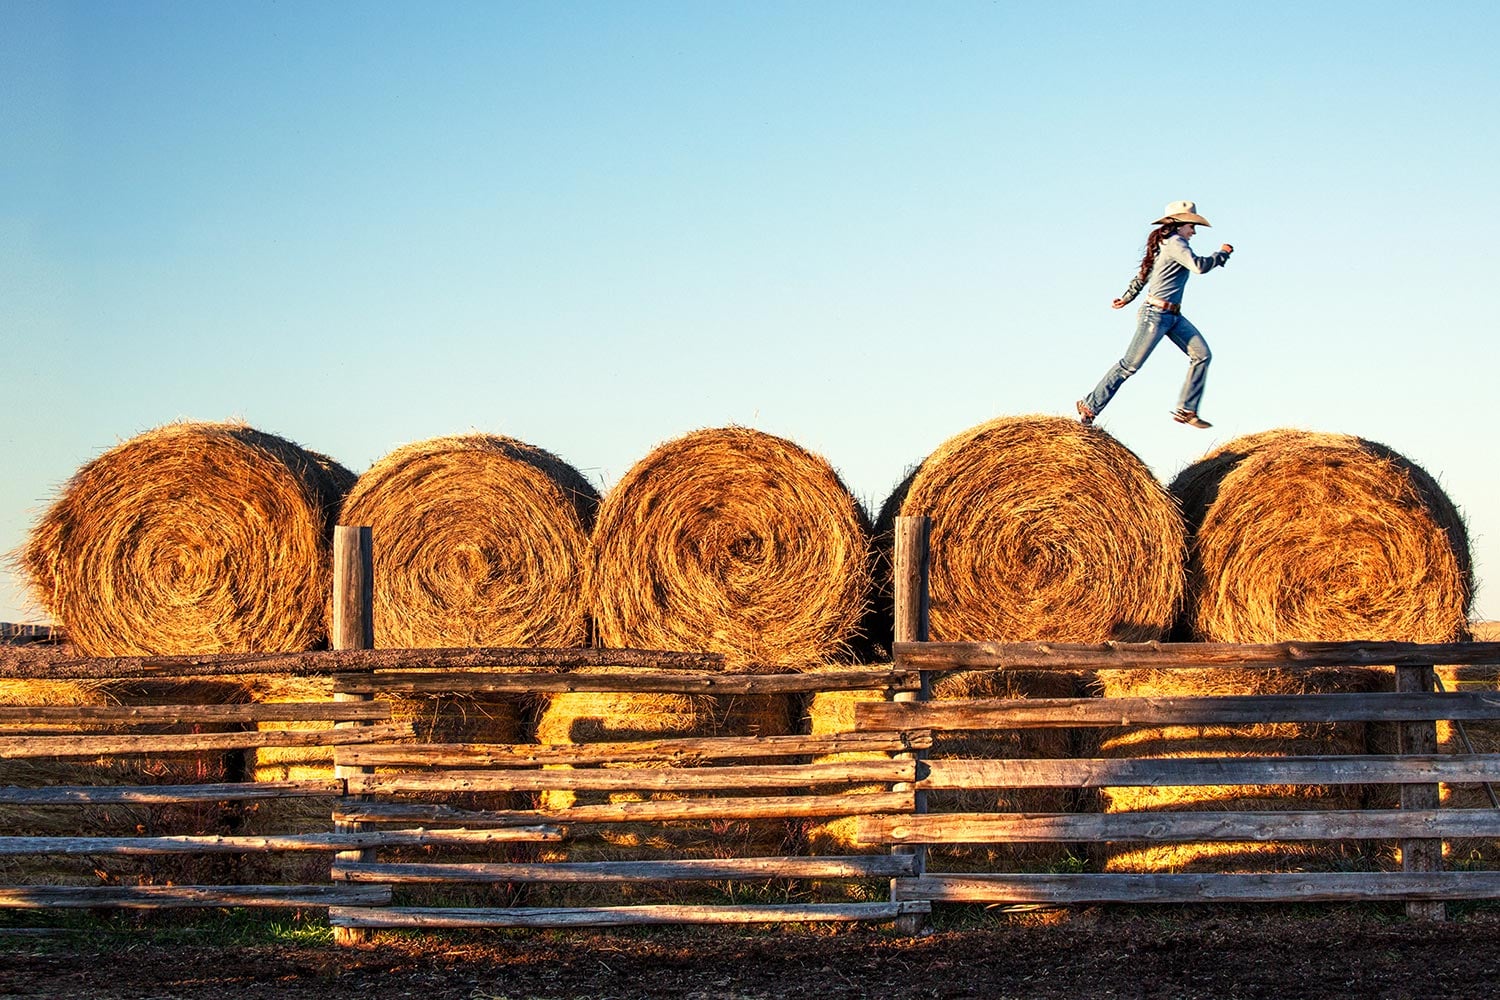 Leaping Over Bales